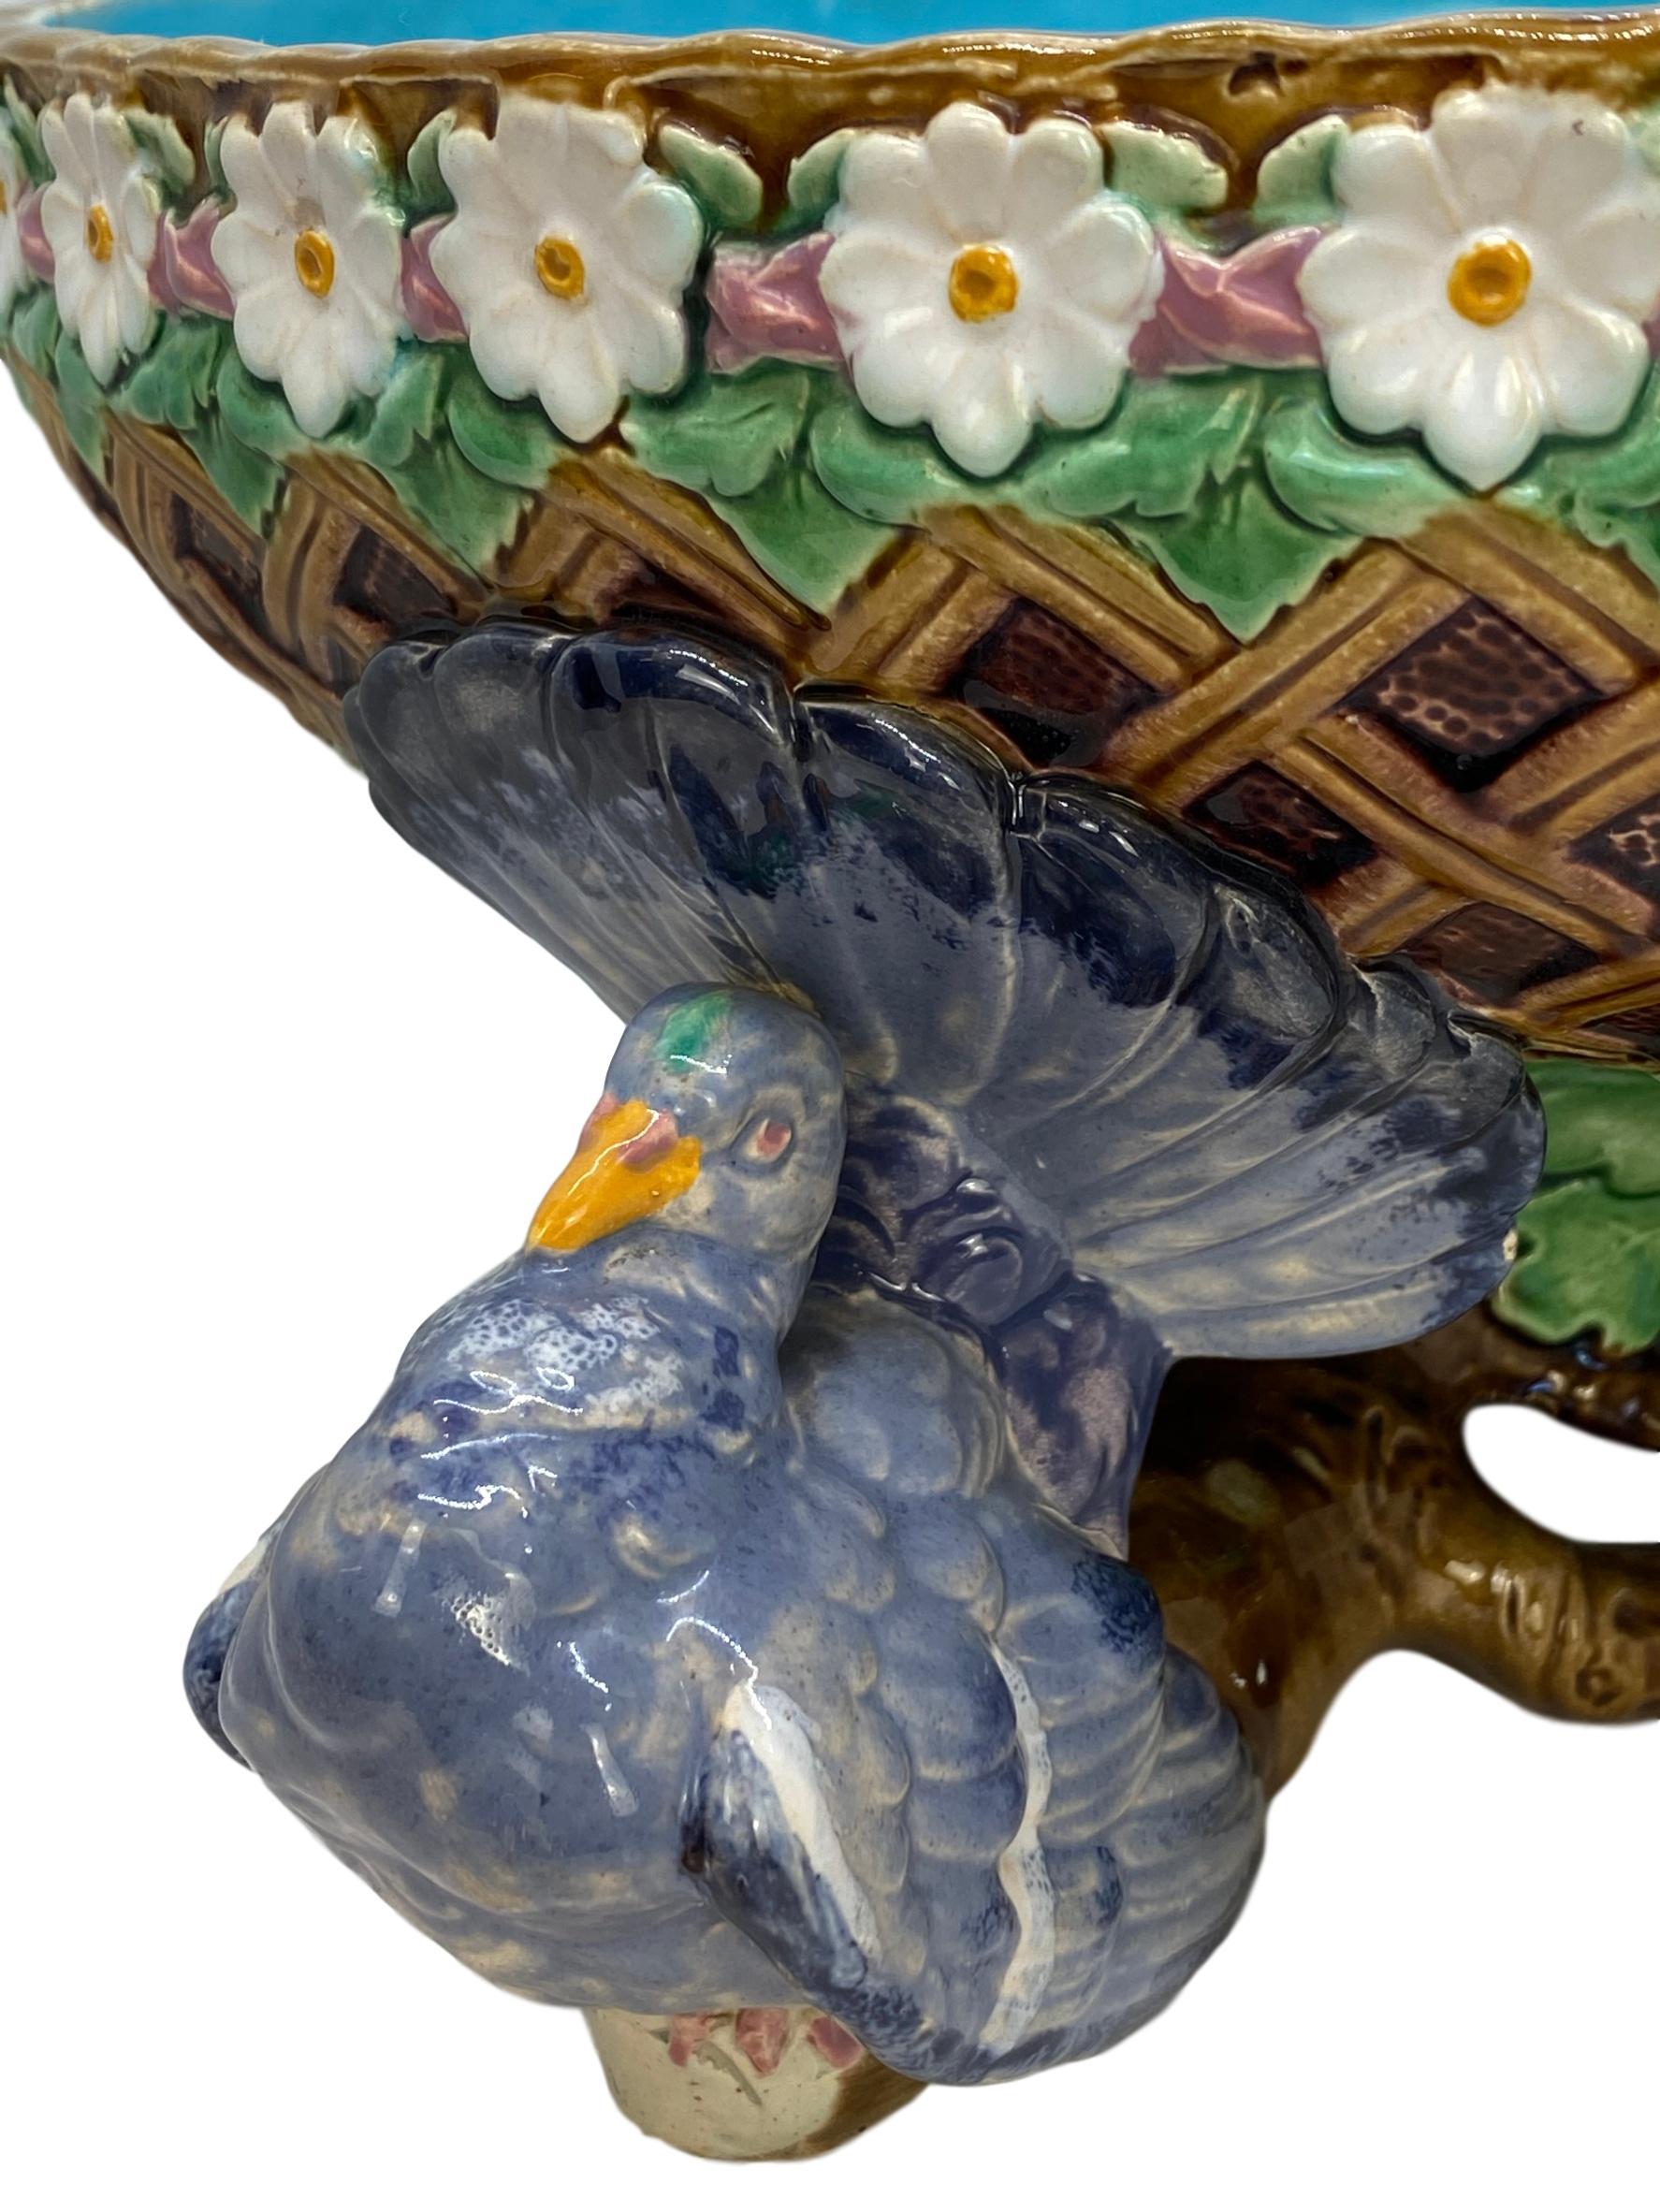 Minton Majolica Large Fruit Bowl with Three Pigeons Support, English, Dated 1870 For Sale 5